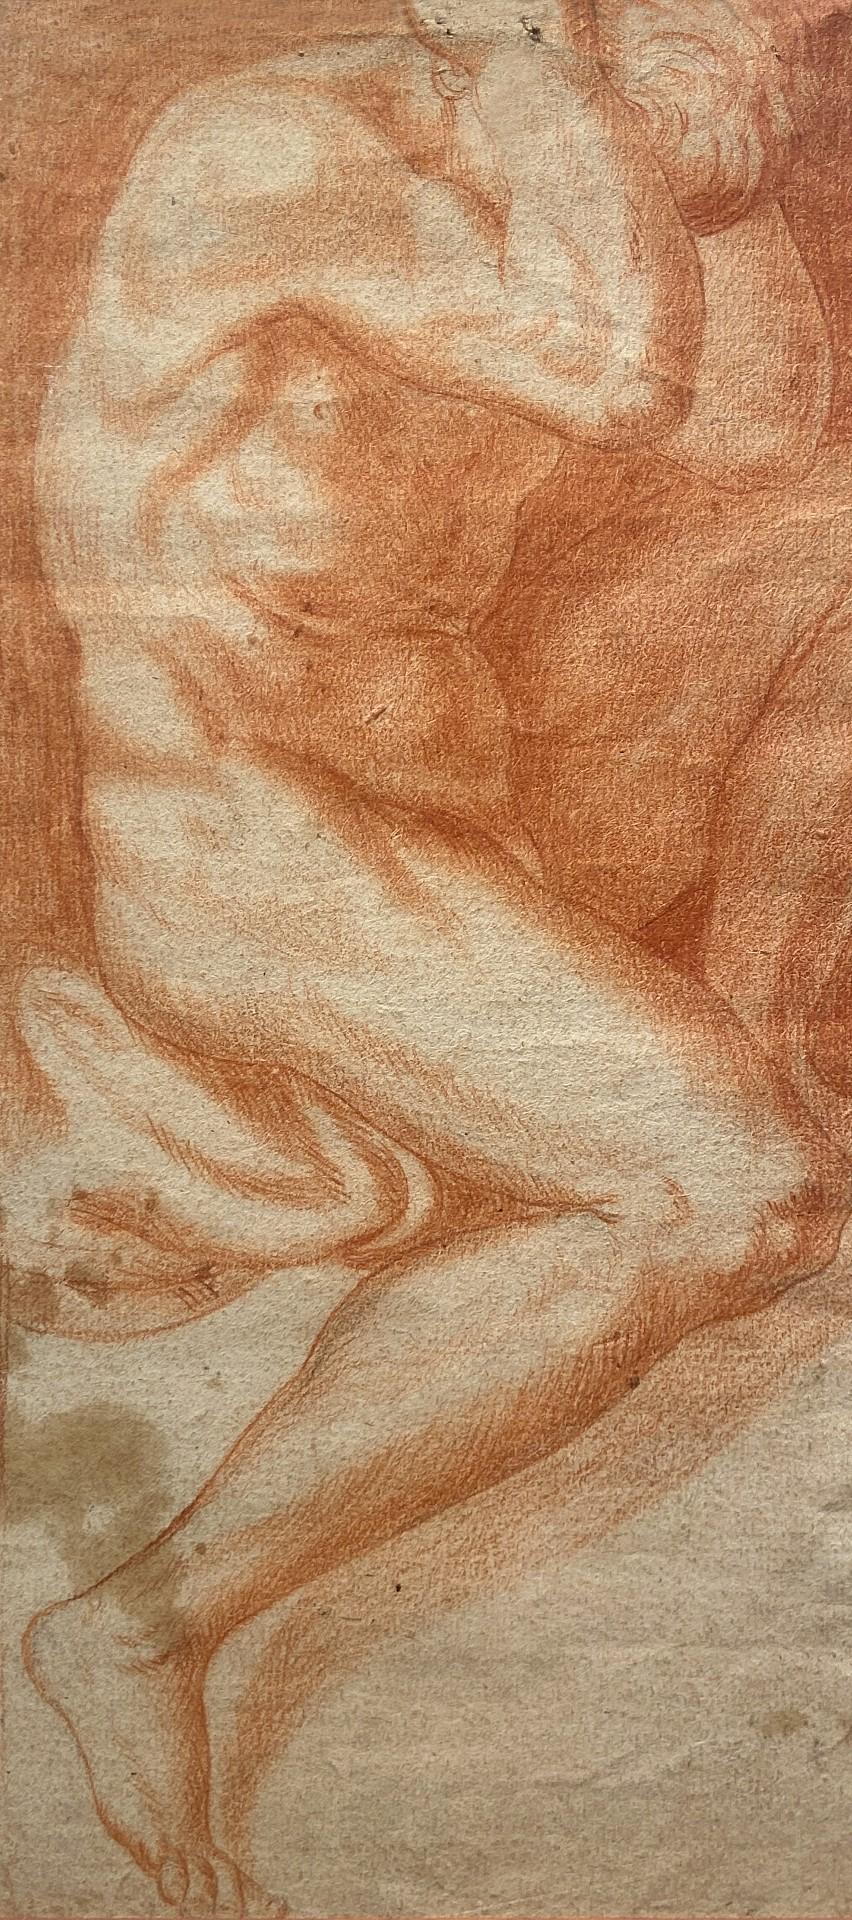 Annibale Carracci Nude - The Captive, Study of a Naked Man, Red Chalk Study, Carracci Gallery